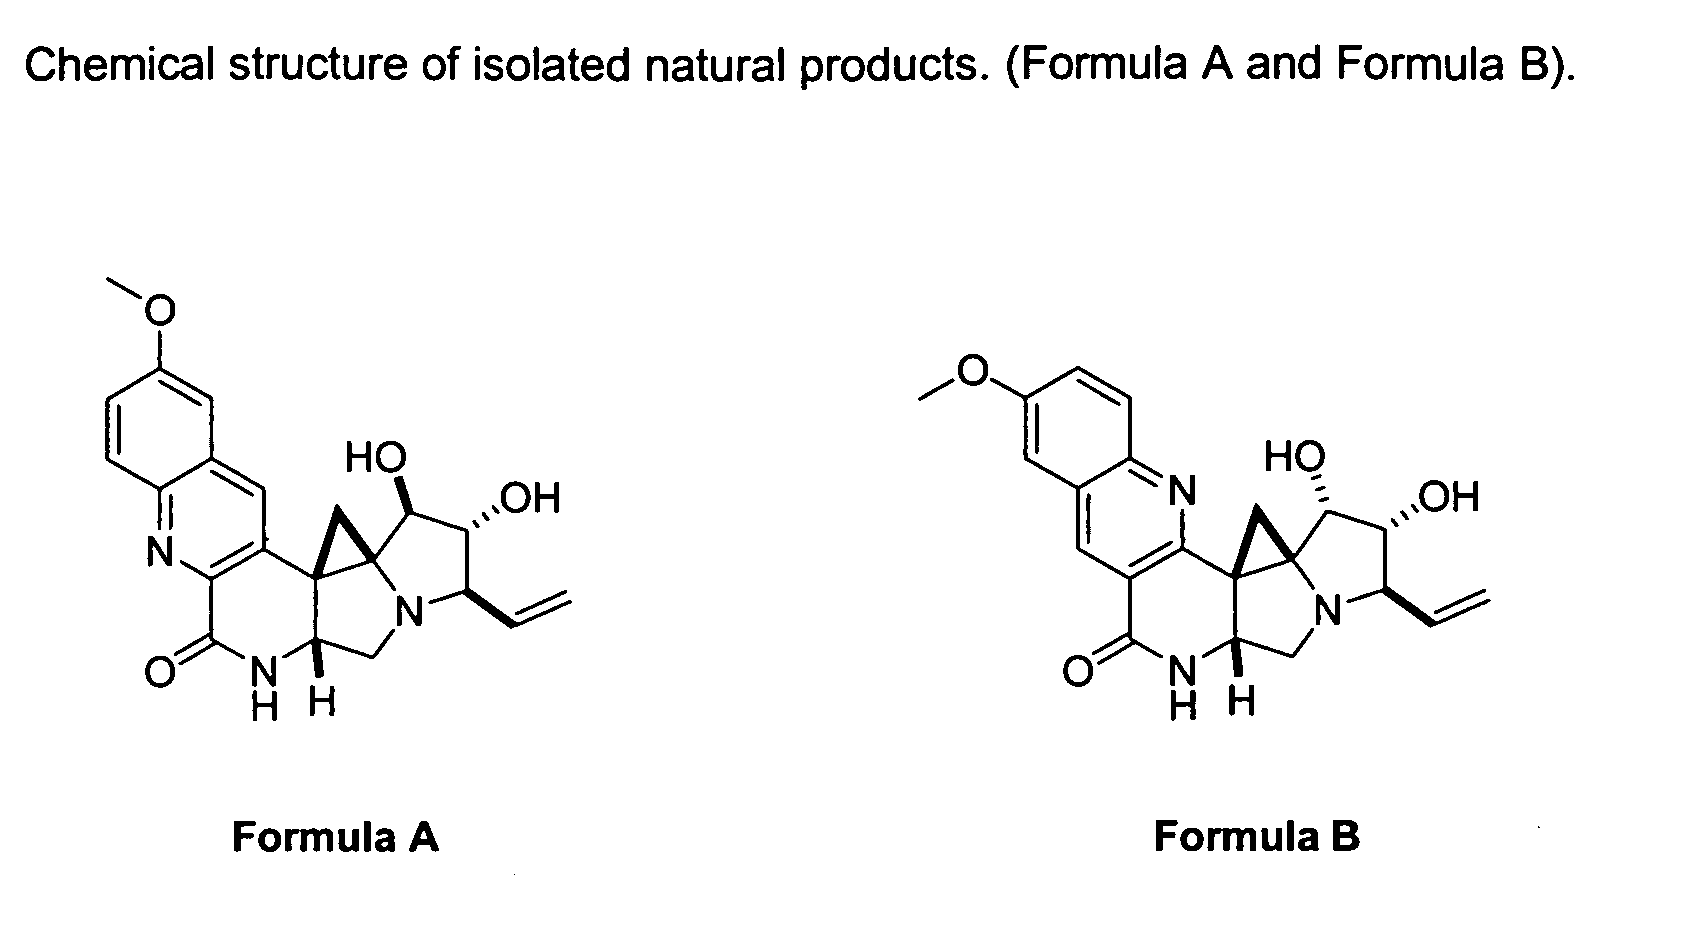 Natural product derivatives with antimalarial activity